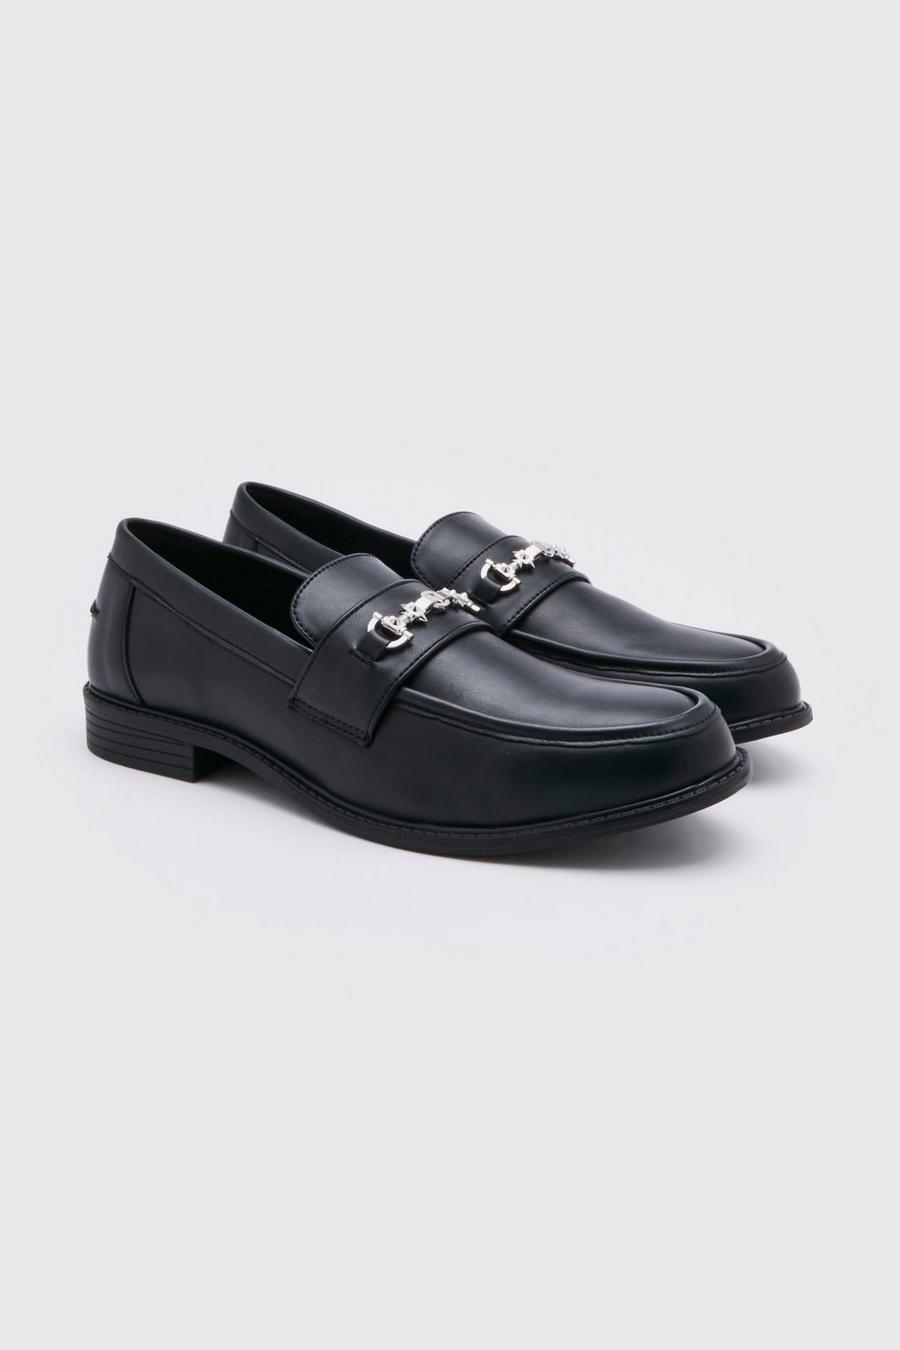 Black Monochrome Penny Loafers Met Ketting Detail